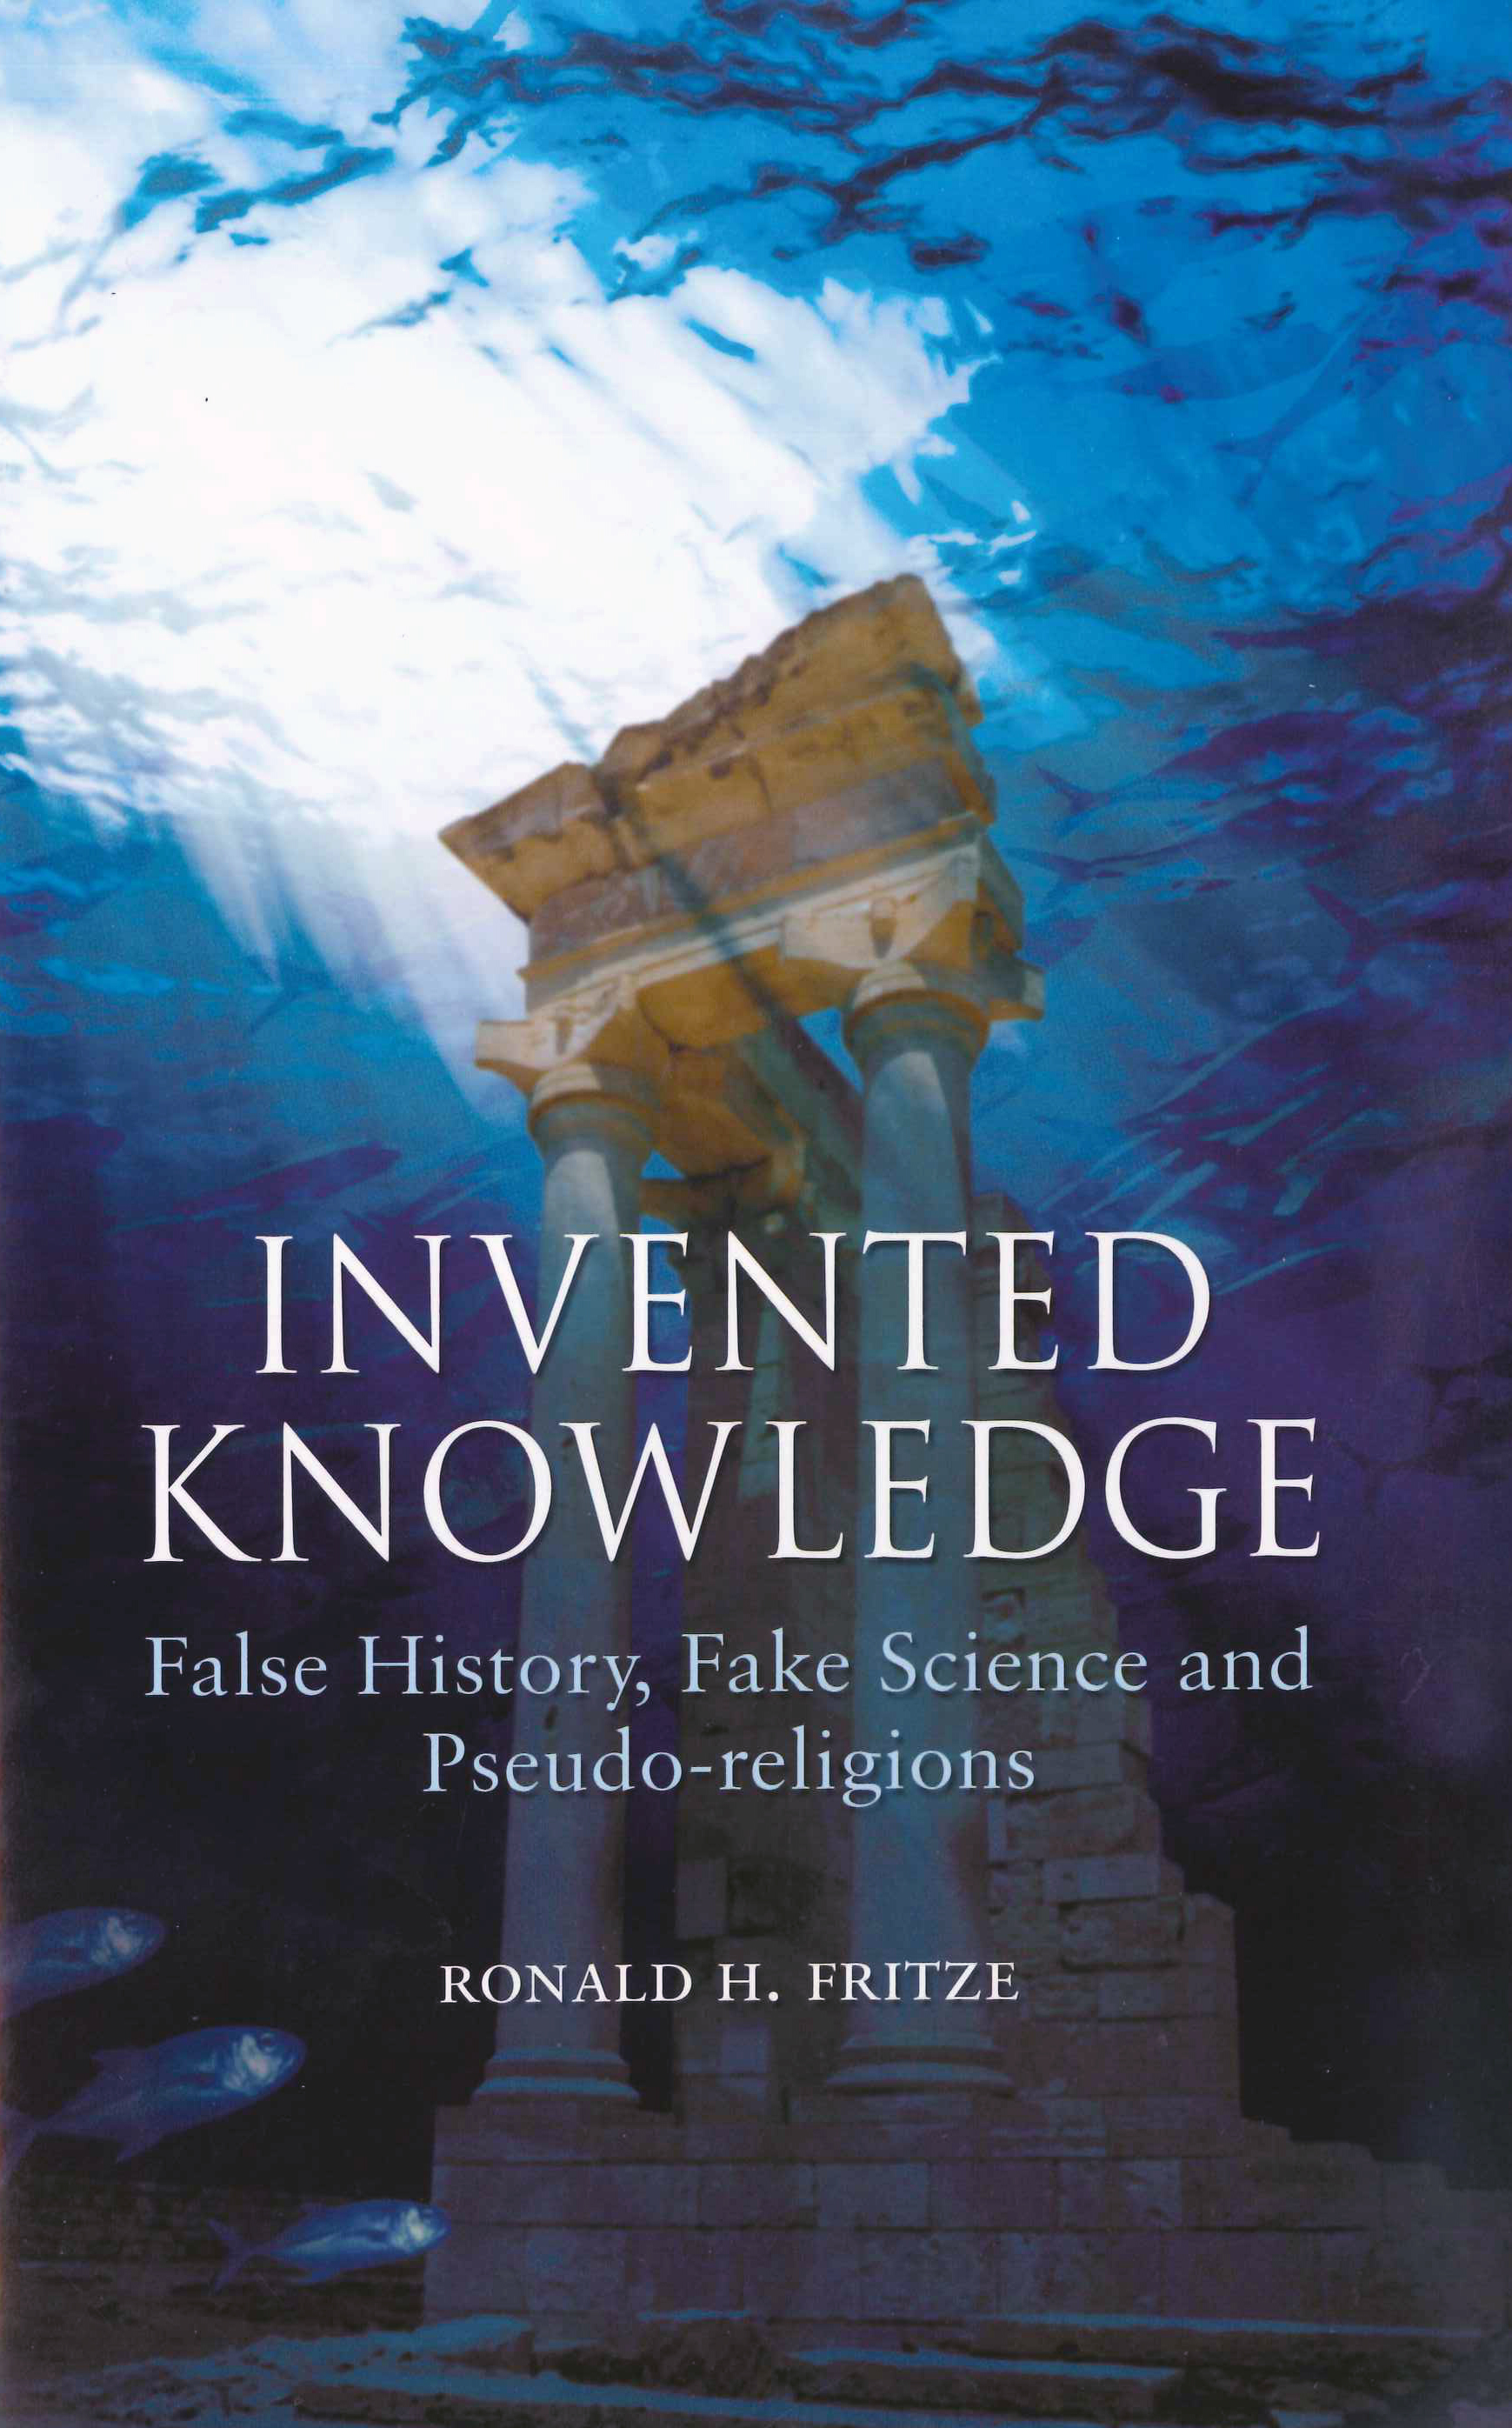 Invented Knowledge, by Ronald Fritze